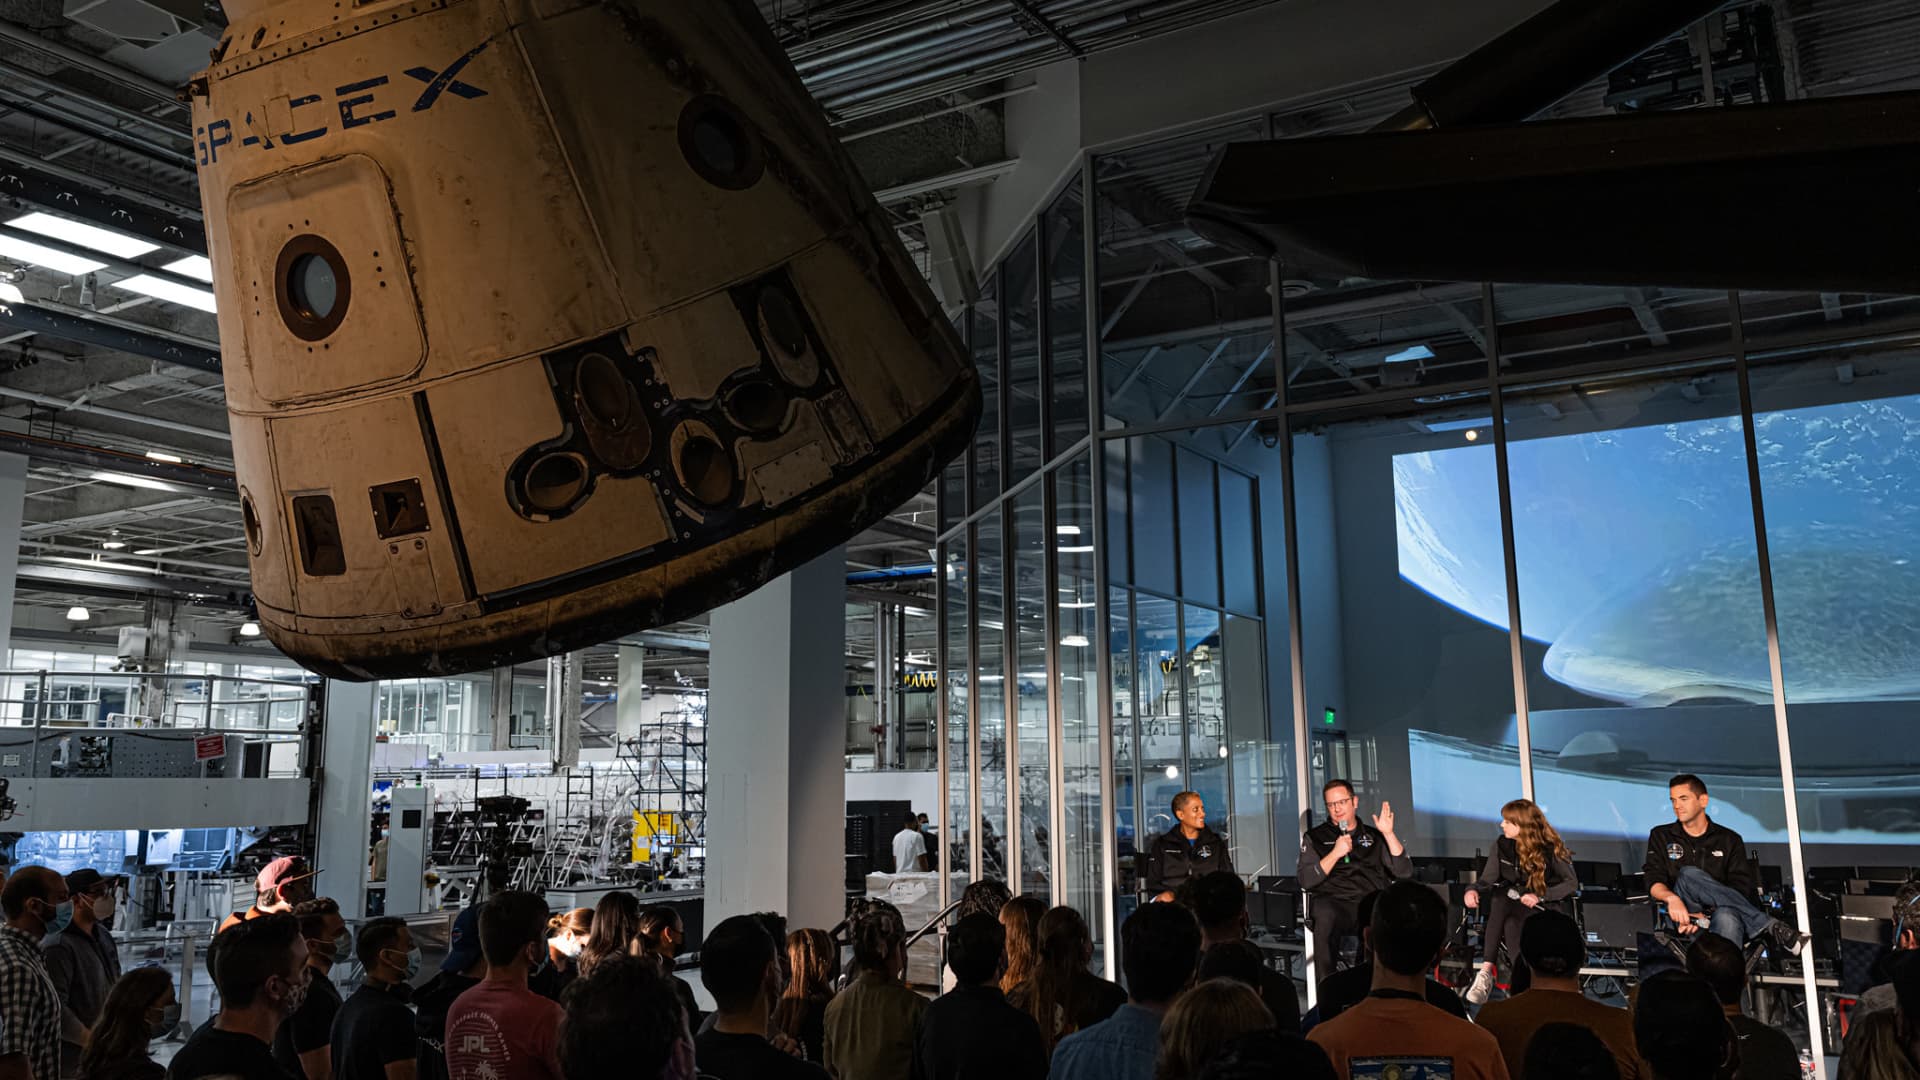 The Inspiration4 crew speaks to SpaceX employees at the company's headquarters in California.